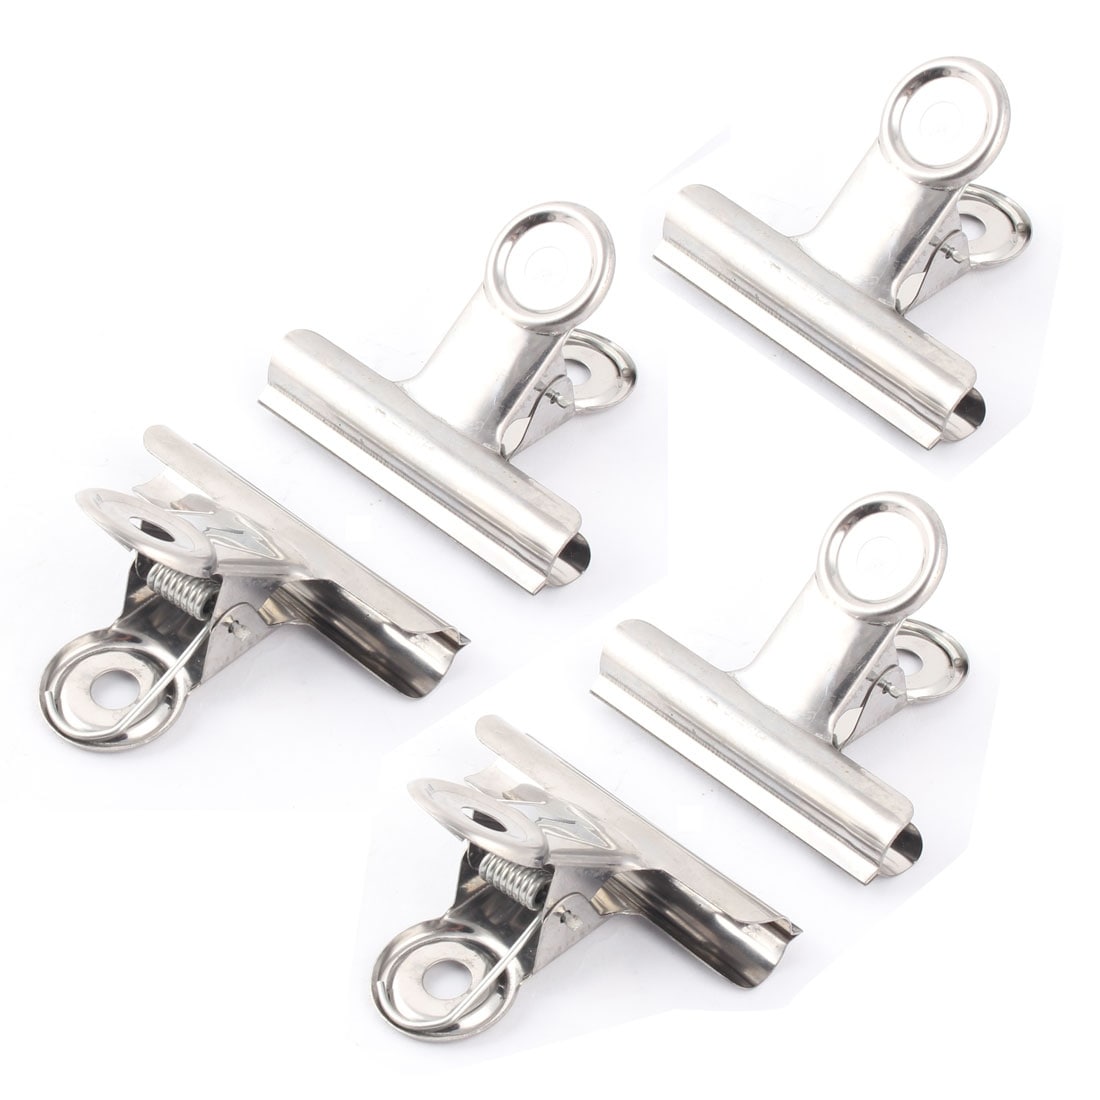 4pcs Stainless Steel Clothespins with Hooks Heavy Duty Clothes